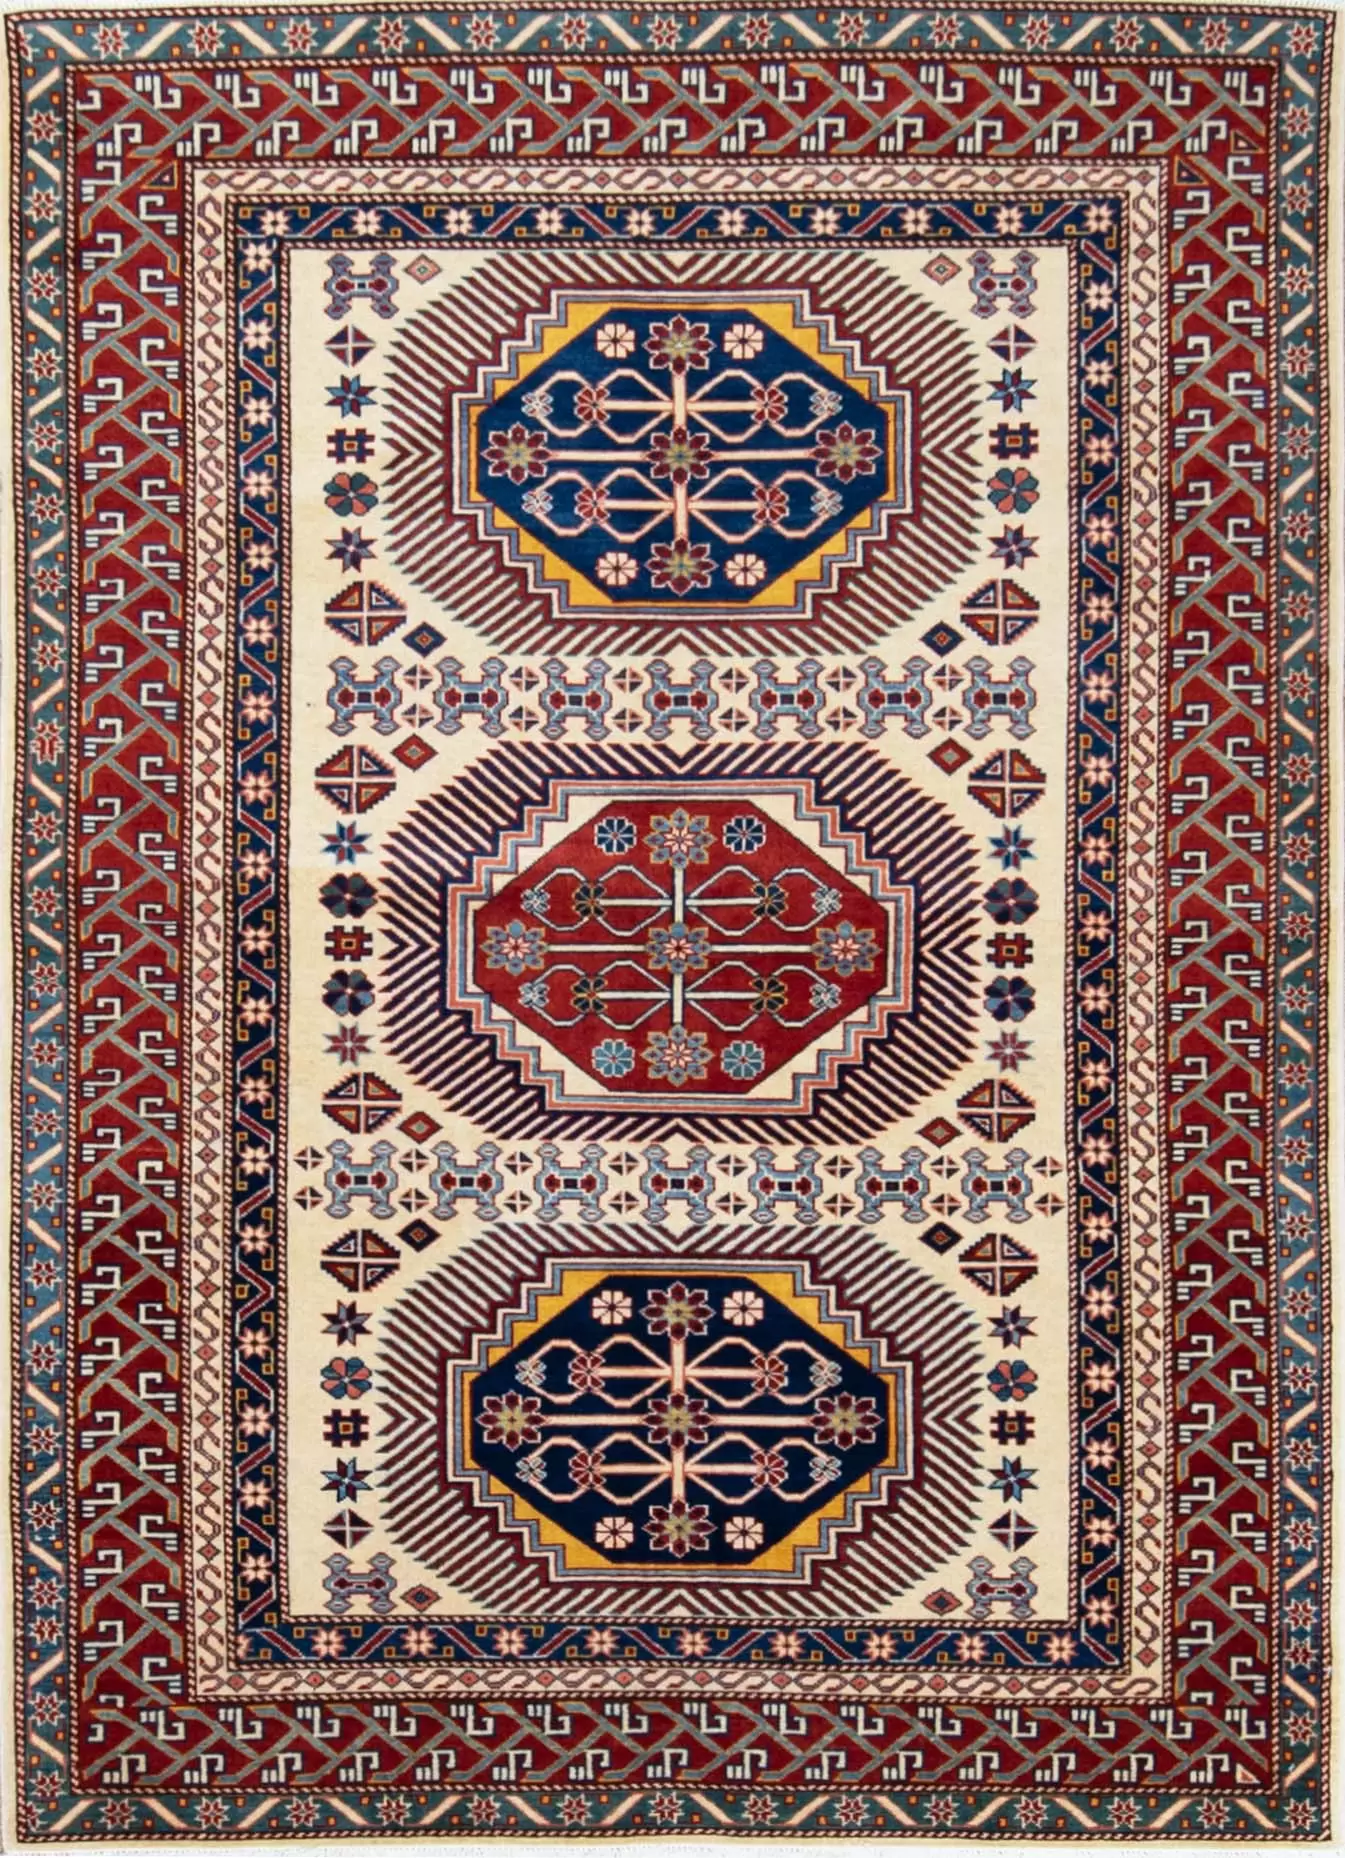 Wool rug 5x7. hand knotted geometric Kazak style rug in beige color. Size 5x7.